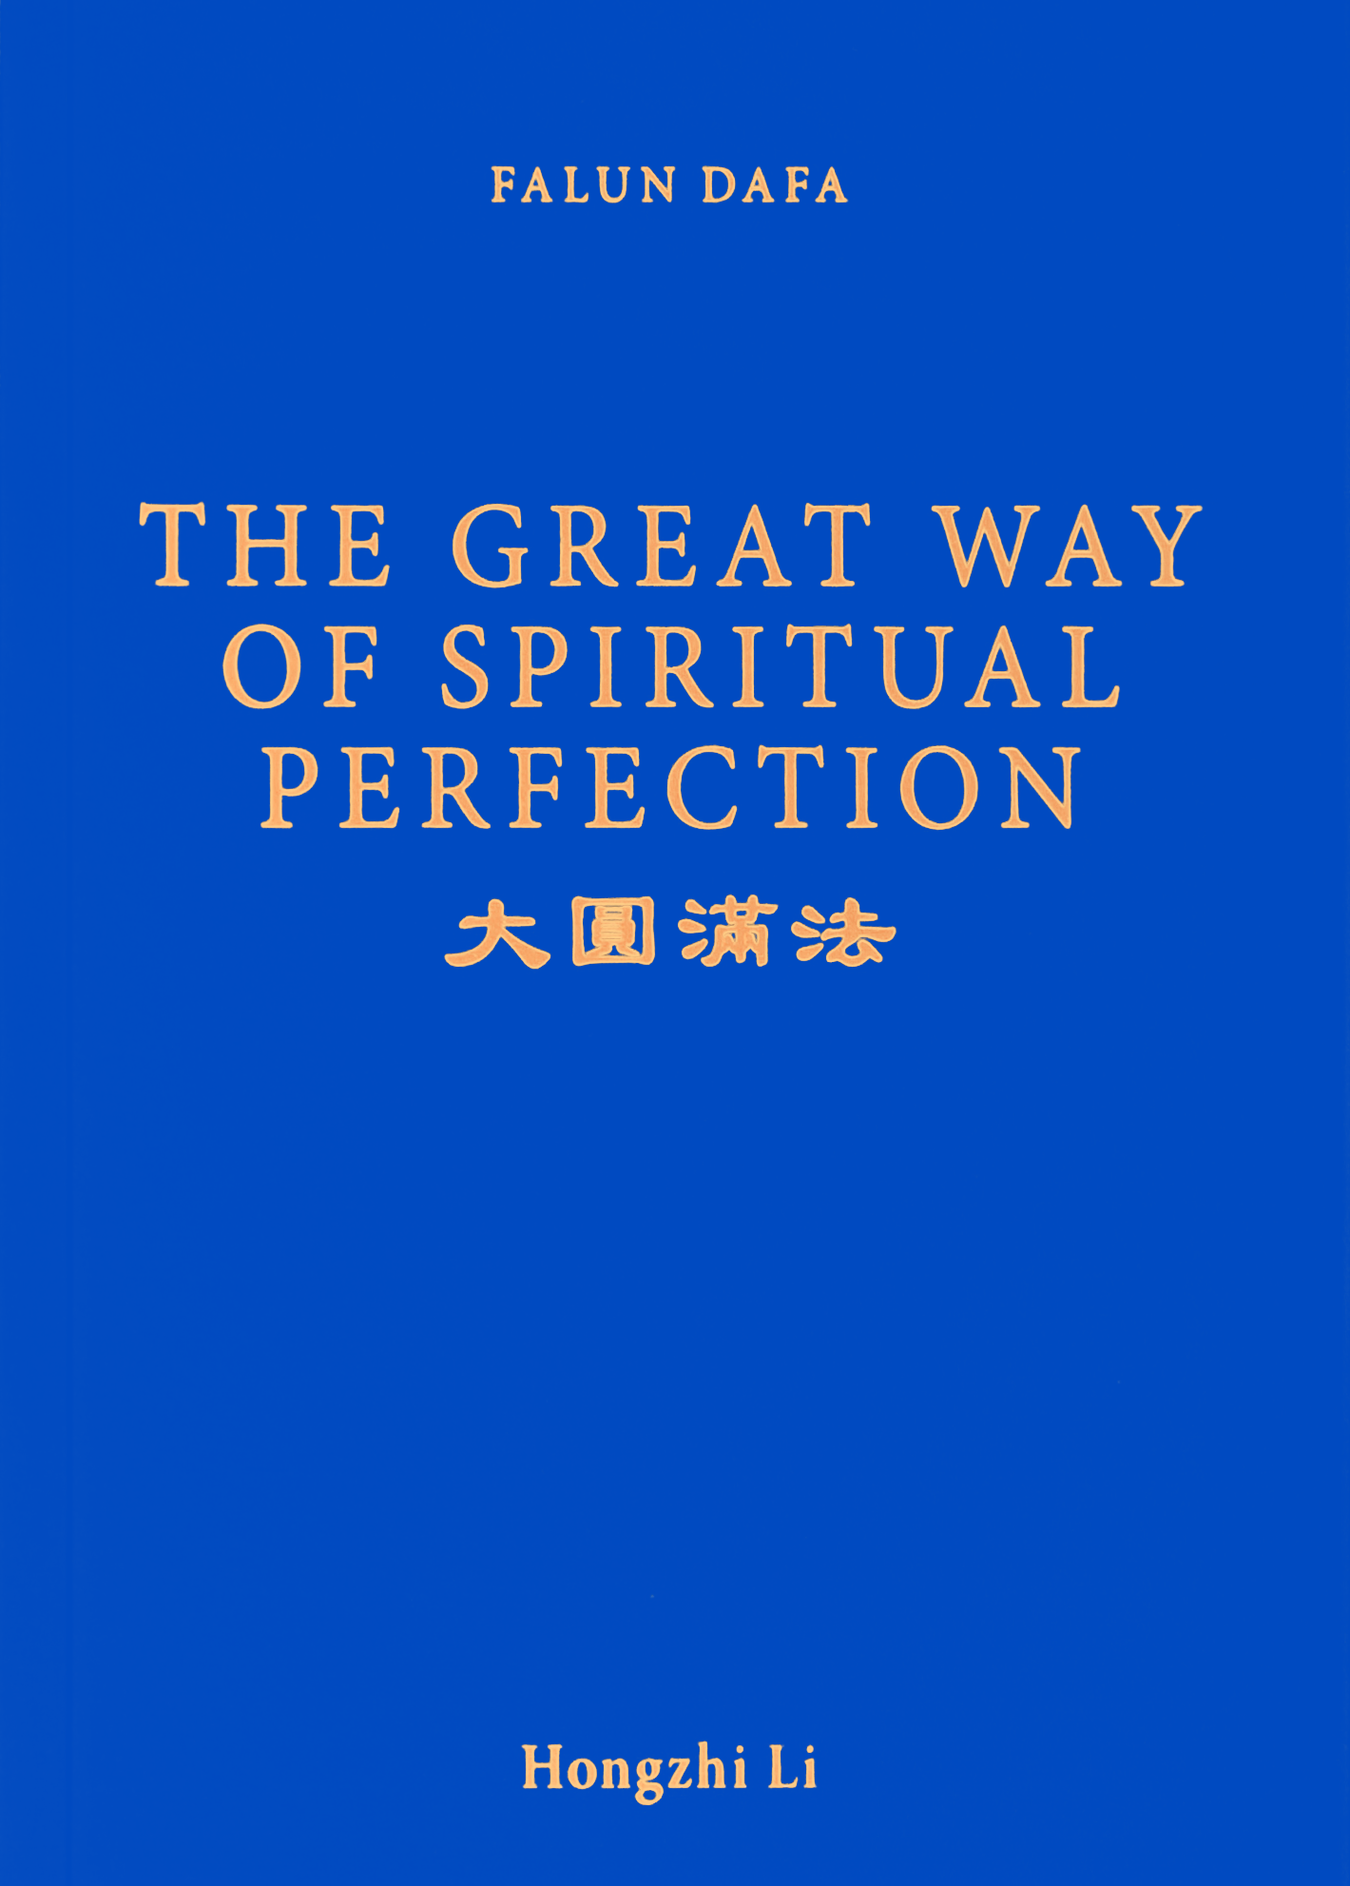 The Great Way of Spiritual Perfection